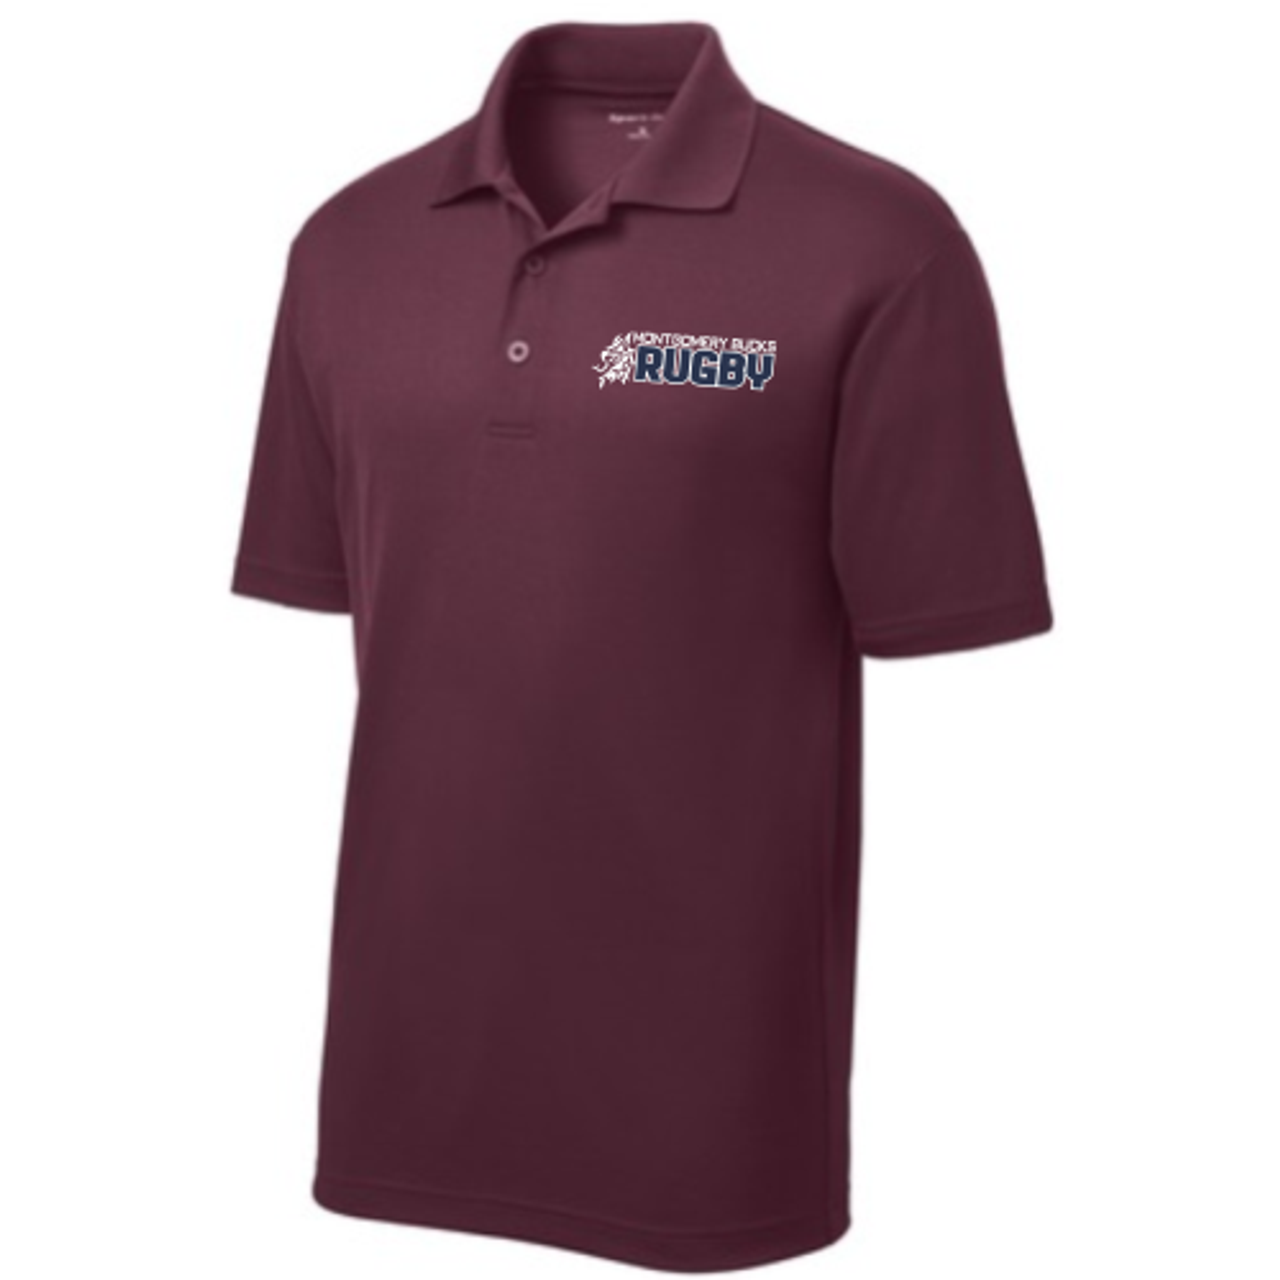 MB Rugby Performance Polo, Maroon